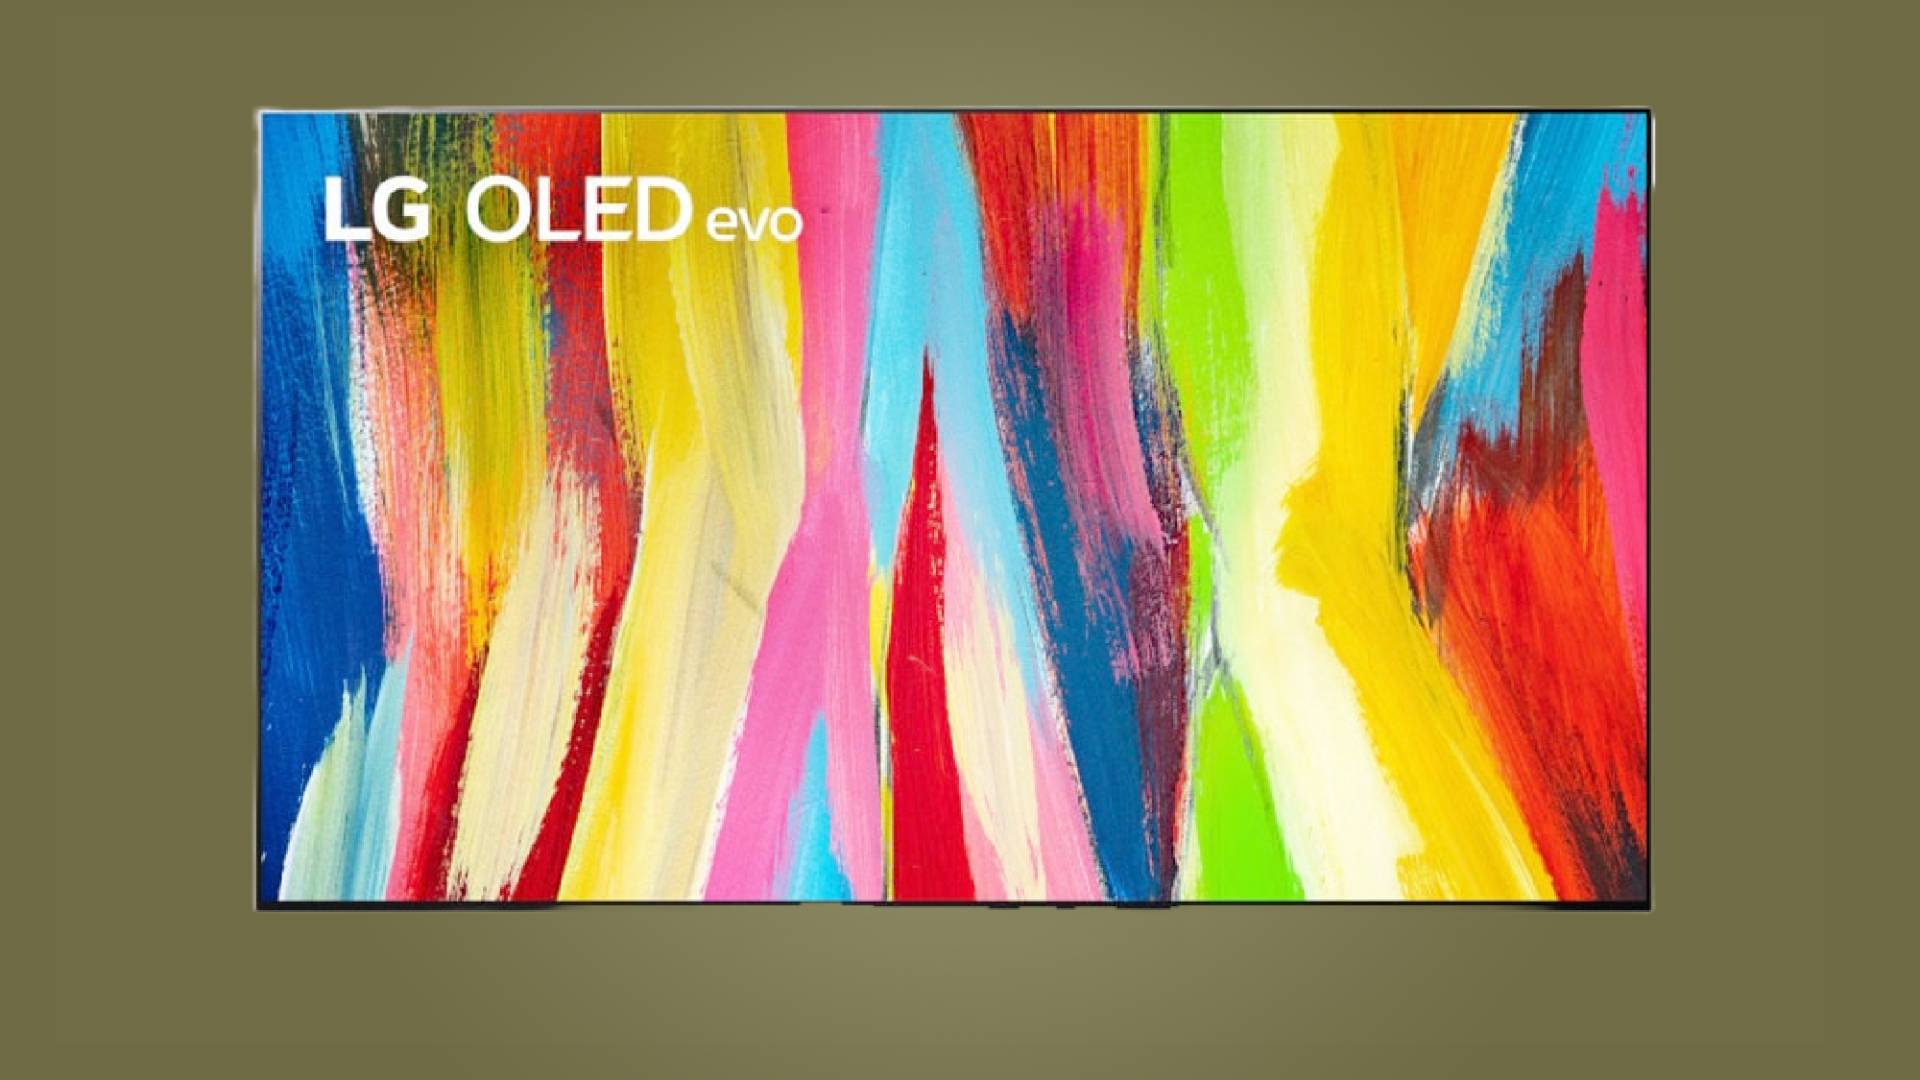 The LG C3 OLED TV displaying a colorful, abstract print on a green background